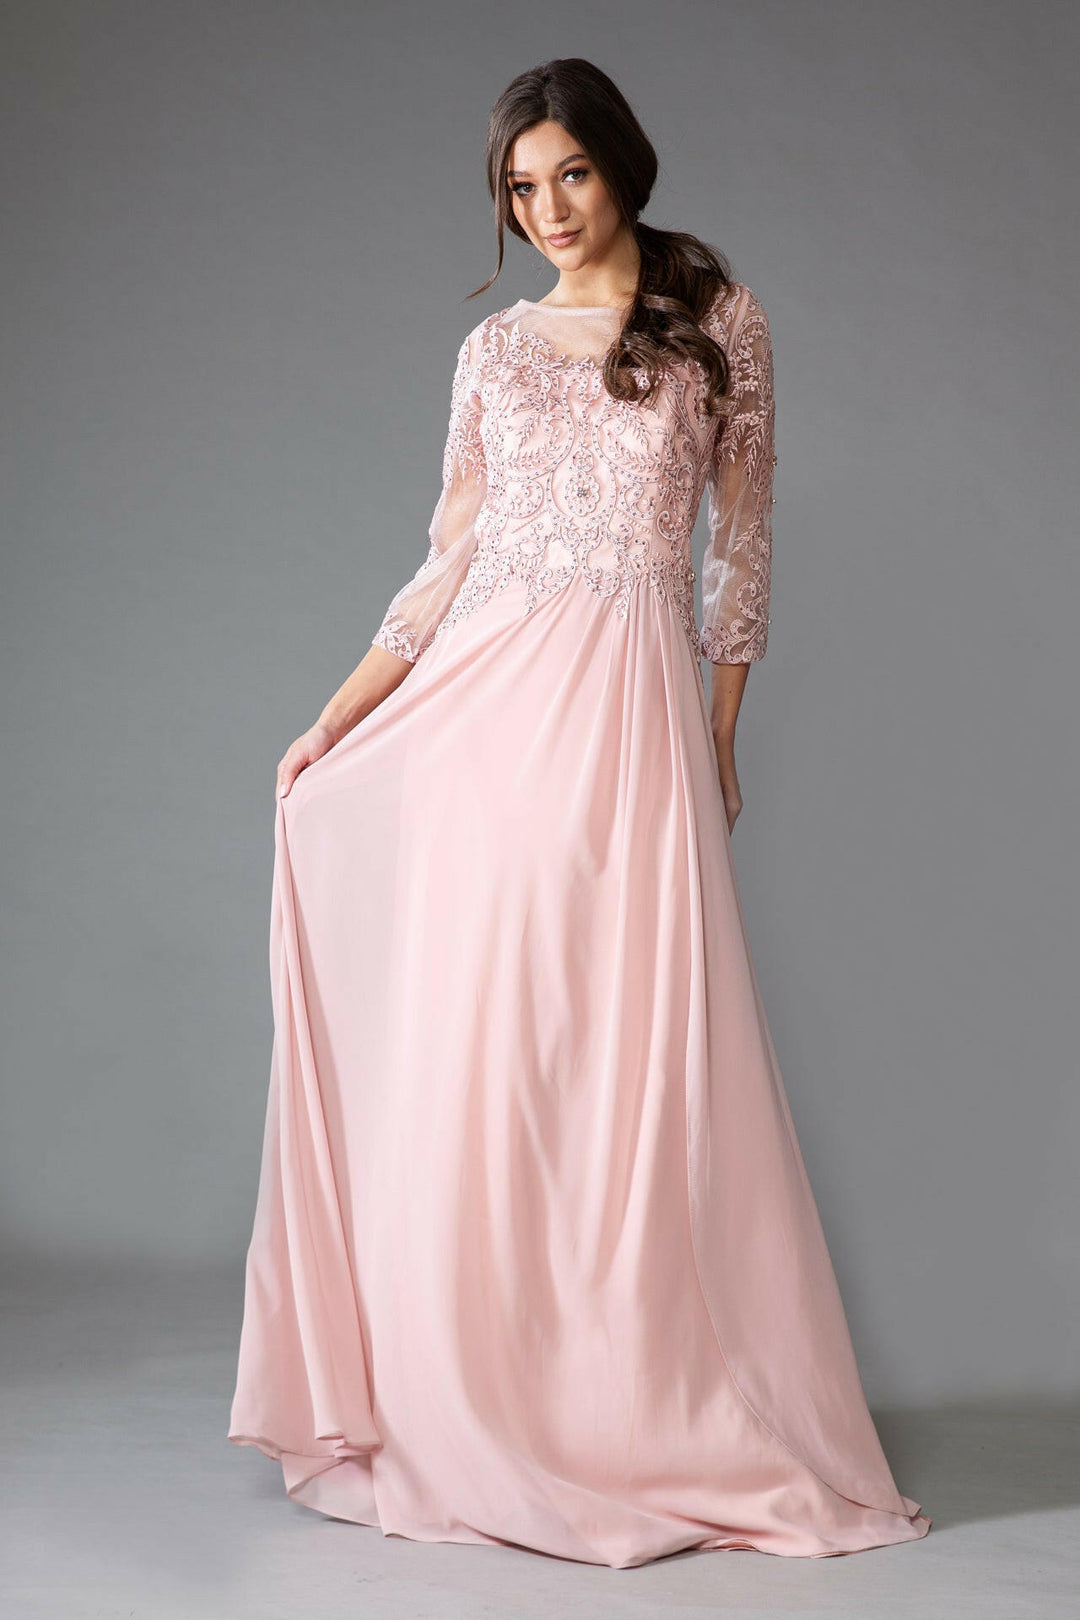 Sheer Sleeves Embroidered Lace Bodice Long Mother Of The Bride Dress AC7043-0